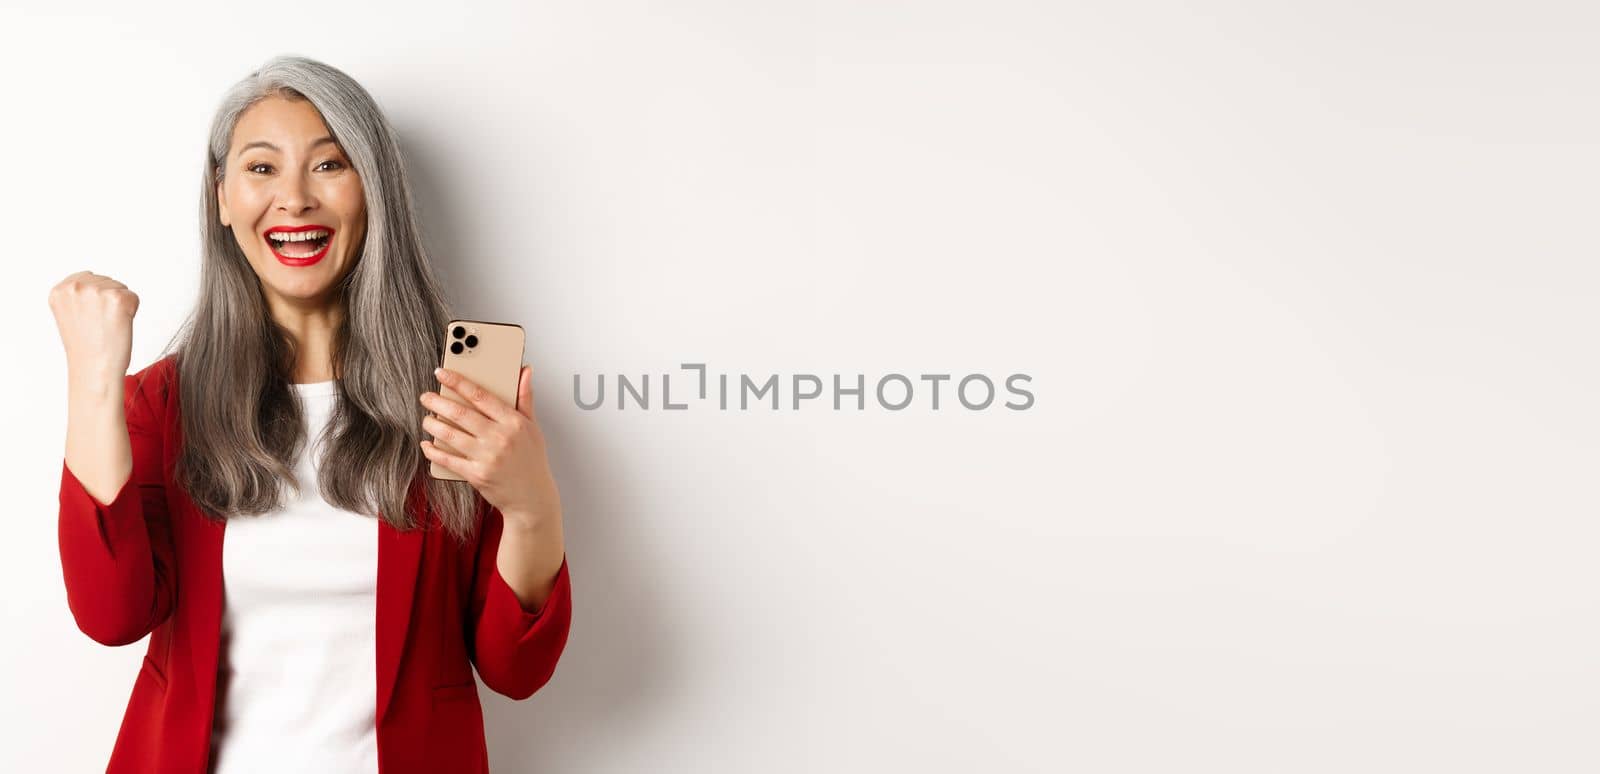 Asian old woman winning online, holding smartphone and making fist pump gesture to celebrate win, triumphing and smiling, standing over white background by Benzoix